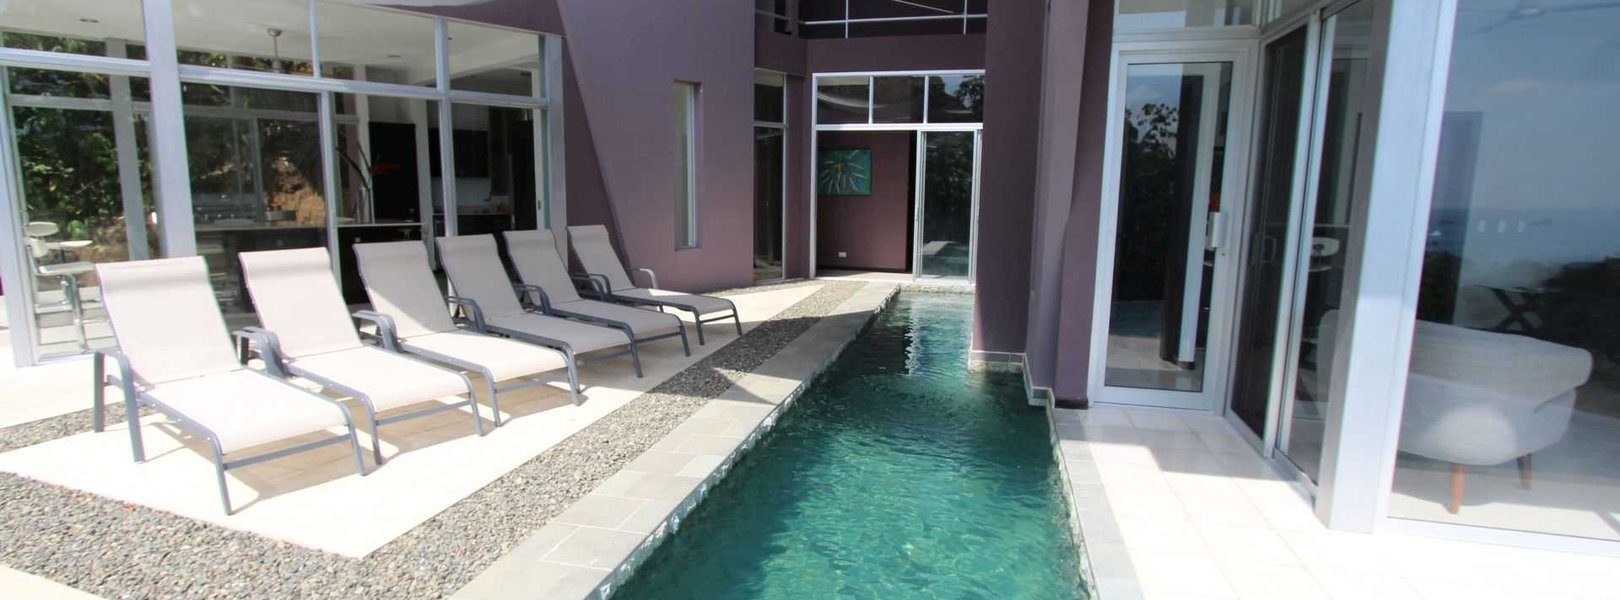 This modern vacation rental in Manuel Antonio features an infinity pool that divides a portion ov the villa.